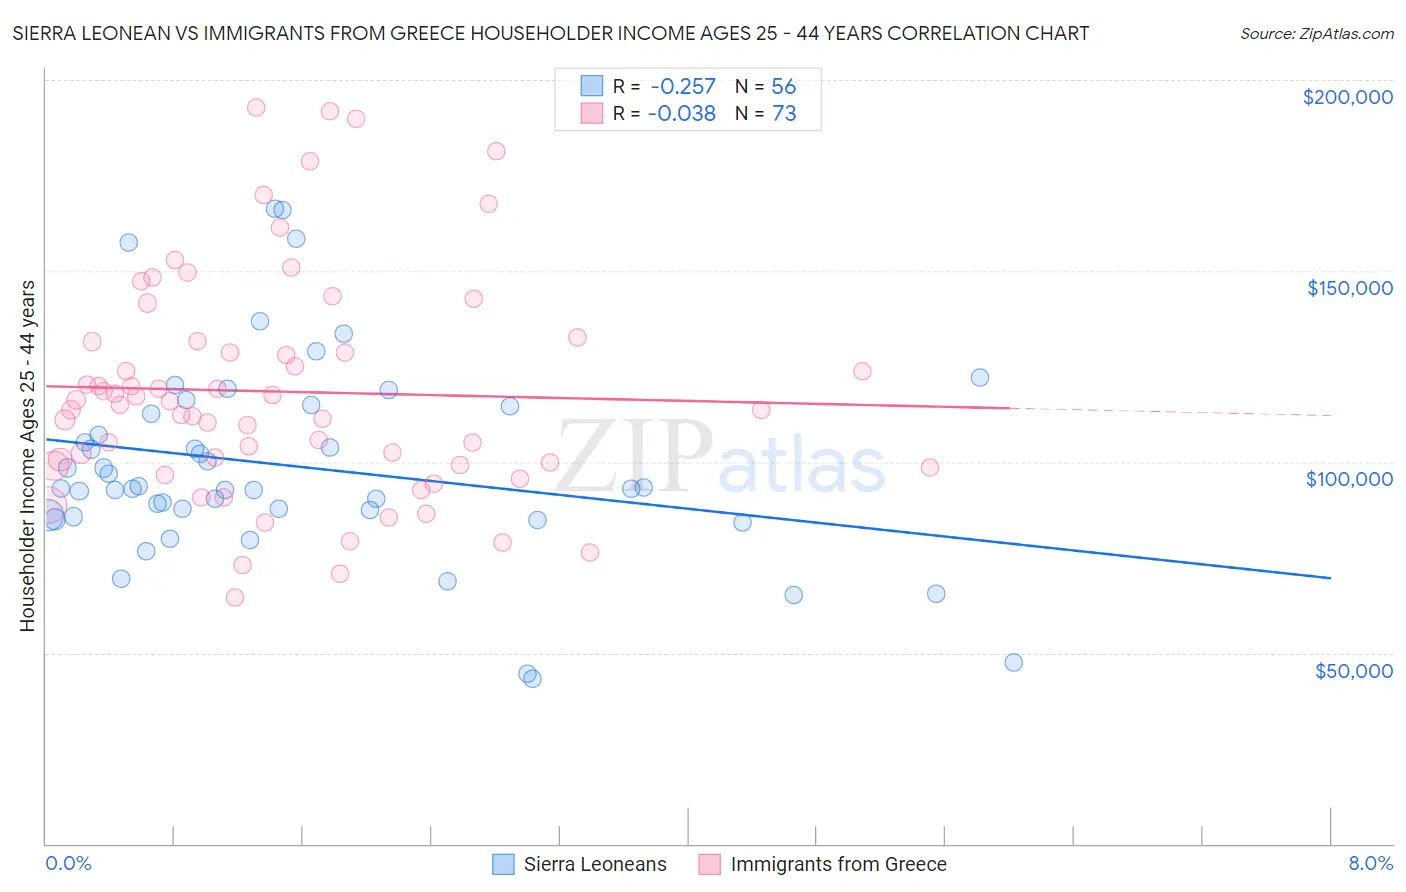 Sierra Leonean vs Immigrants from Greece Householder Income Ages 25 - 44 years